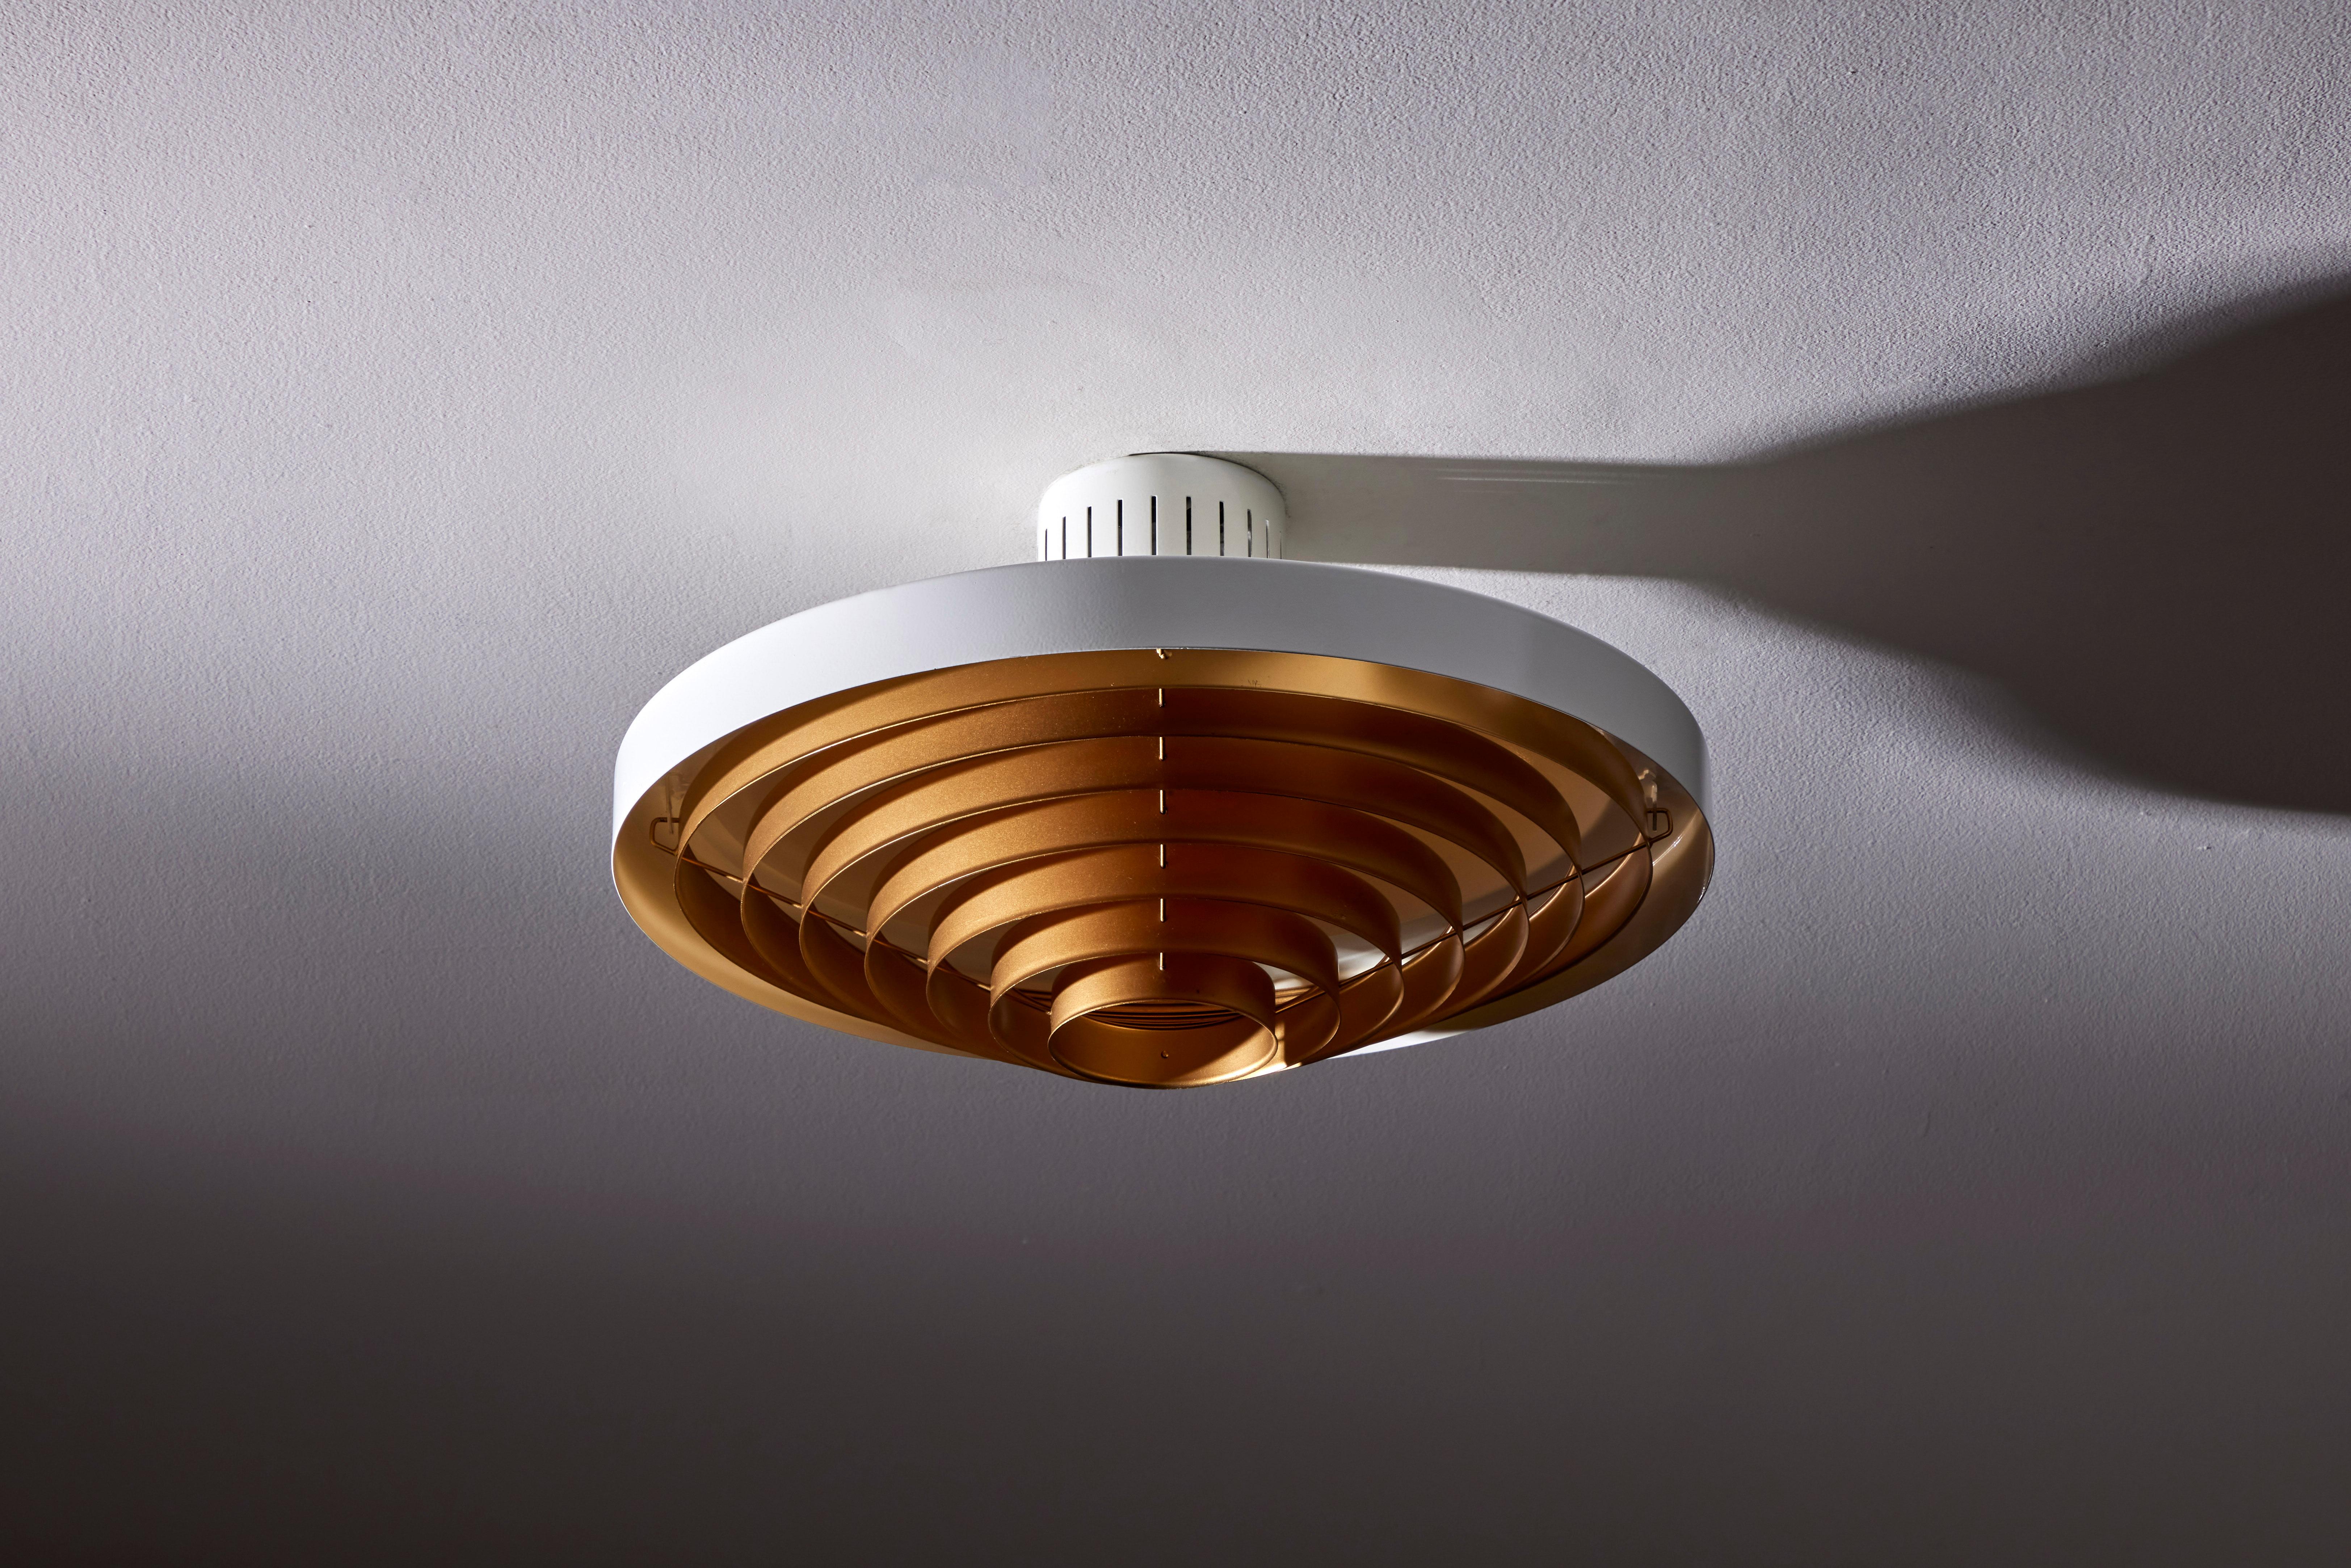 Two Model 5560/Z200 Flush Mount Ceiling Lights by Lisa Johansson-Pape for Orno 2